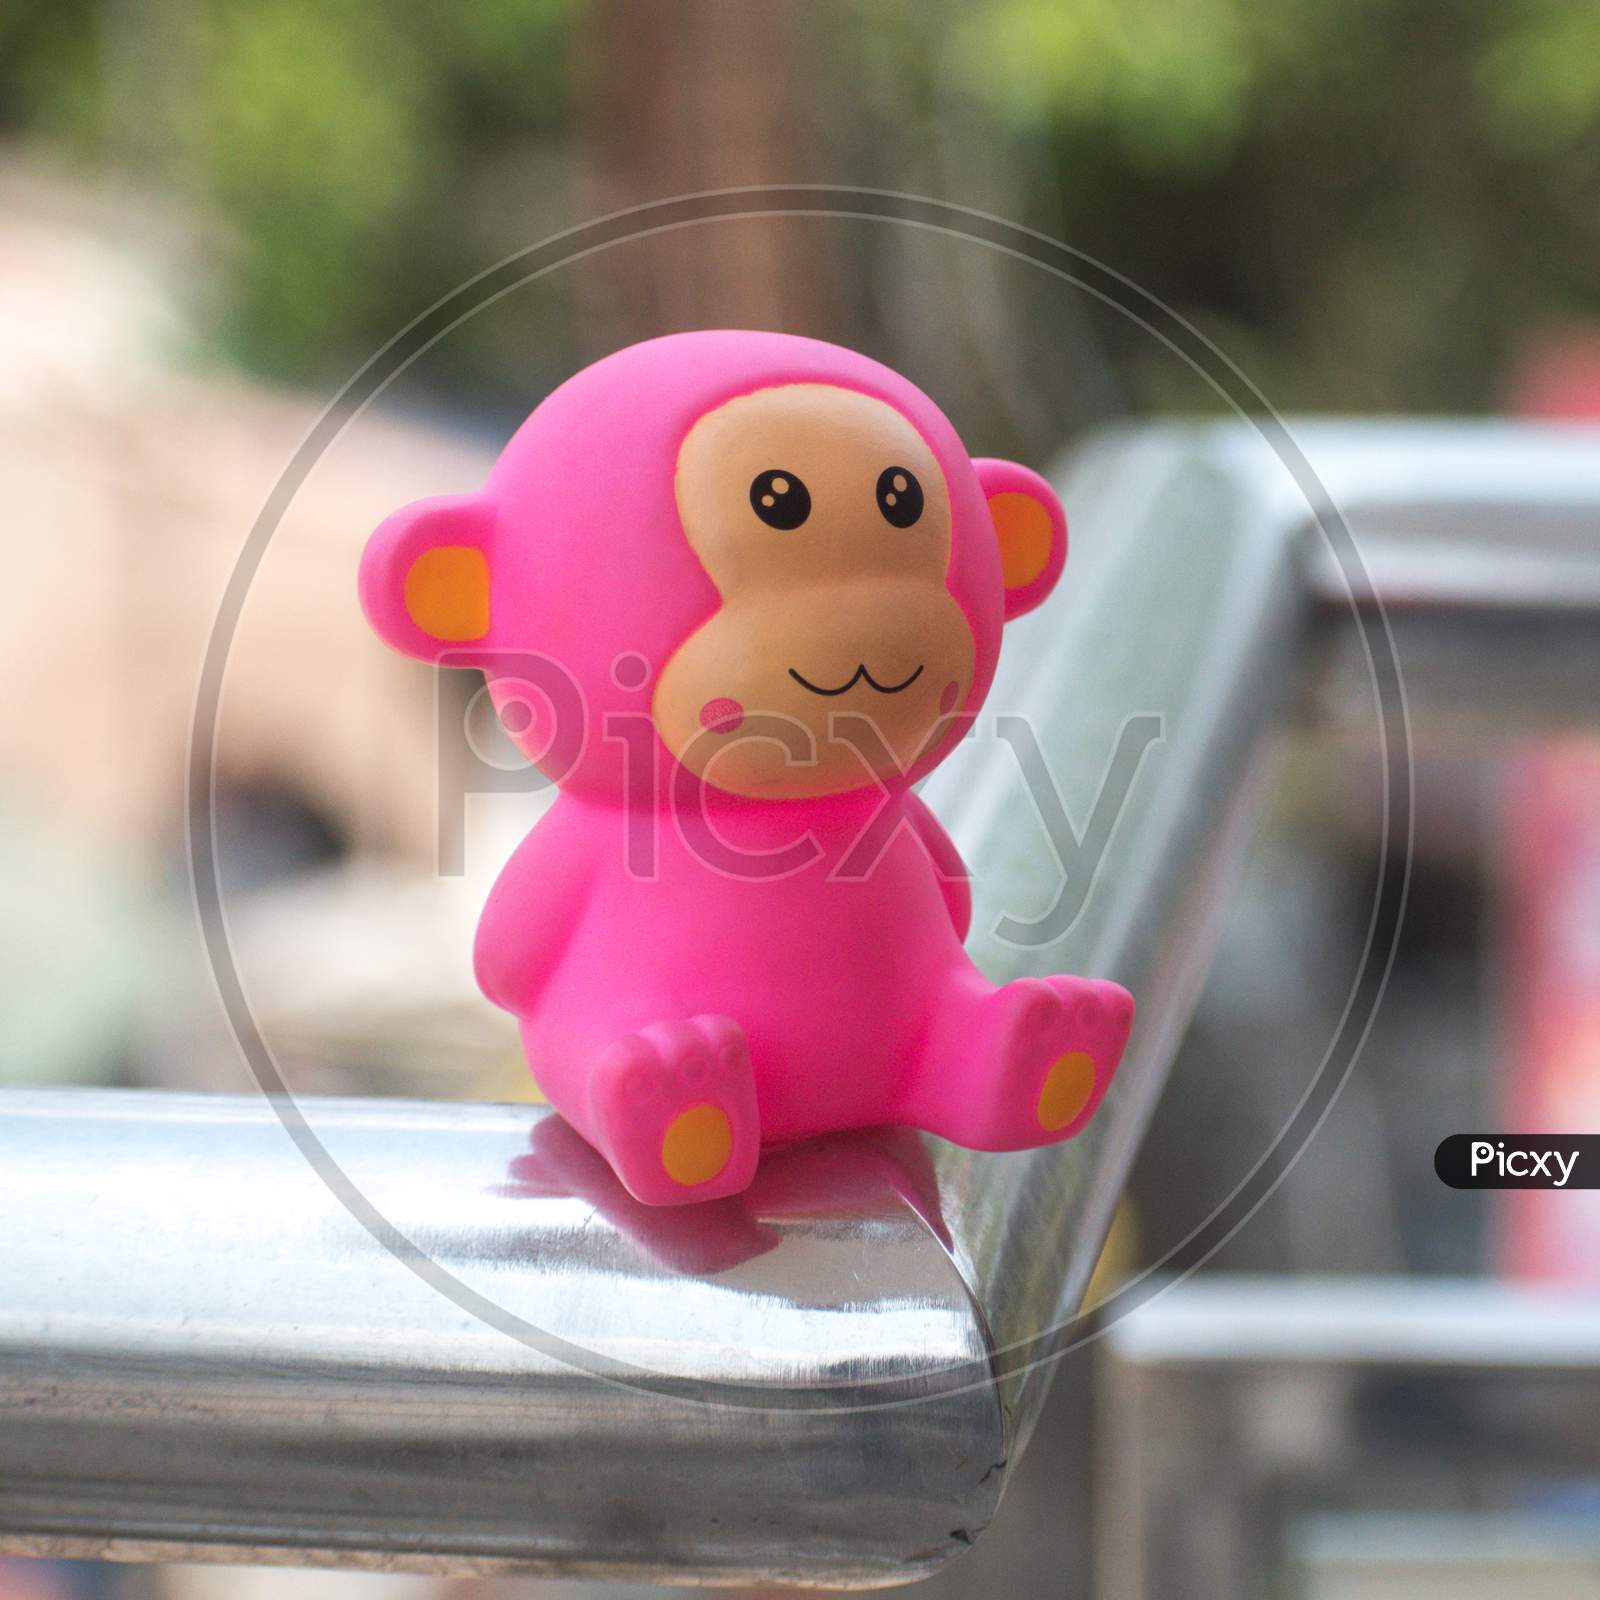 Pink monkey toy on metal grill